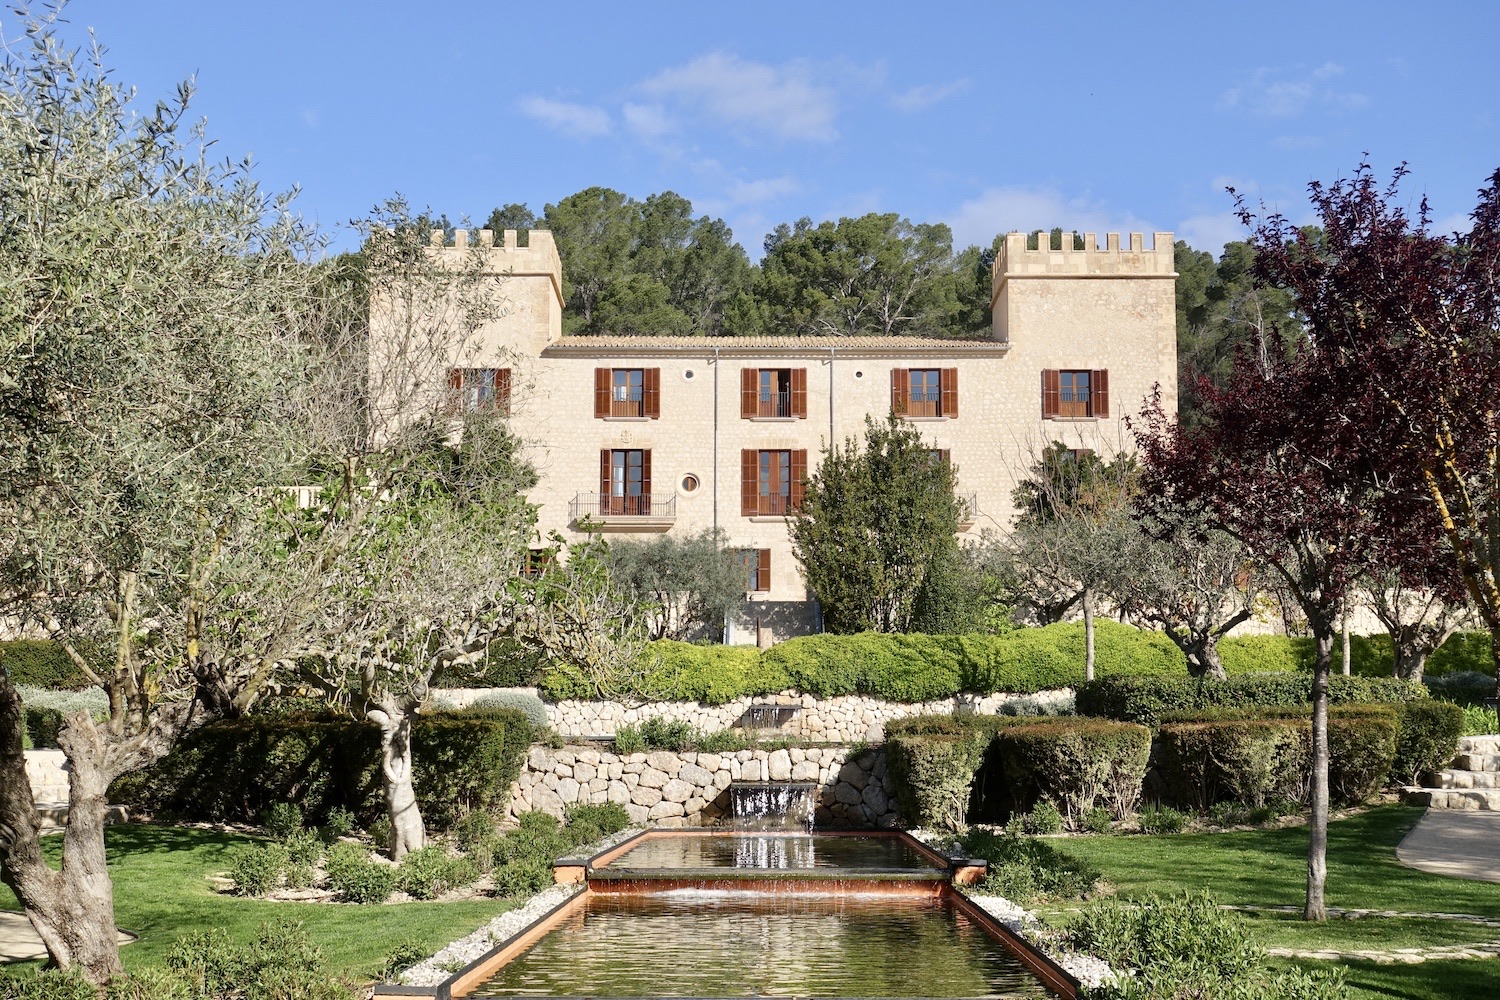 Hotel Castell Son Claret - staying & dining in style in Mallorca/Spain